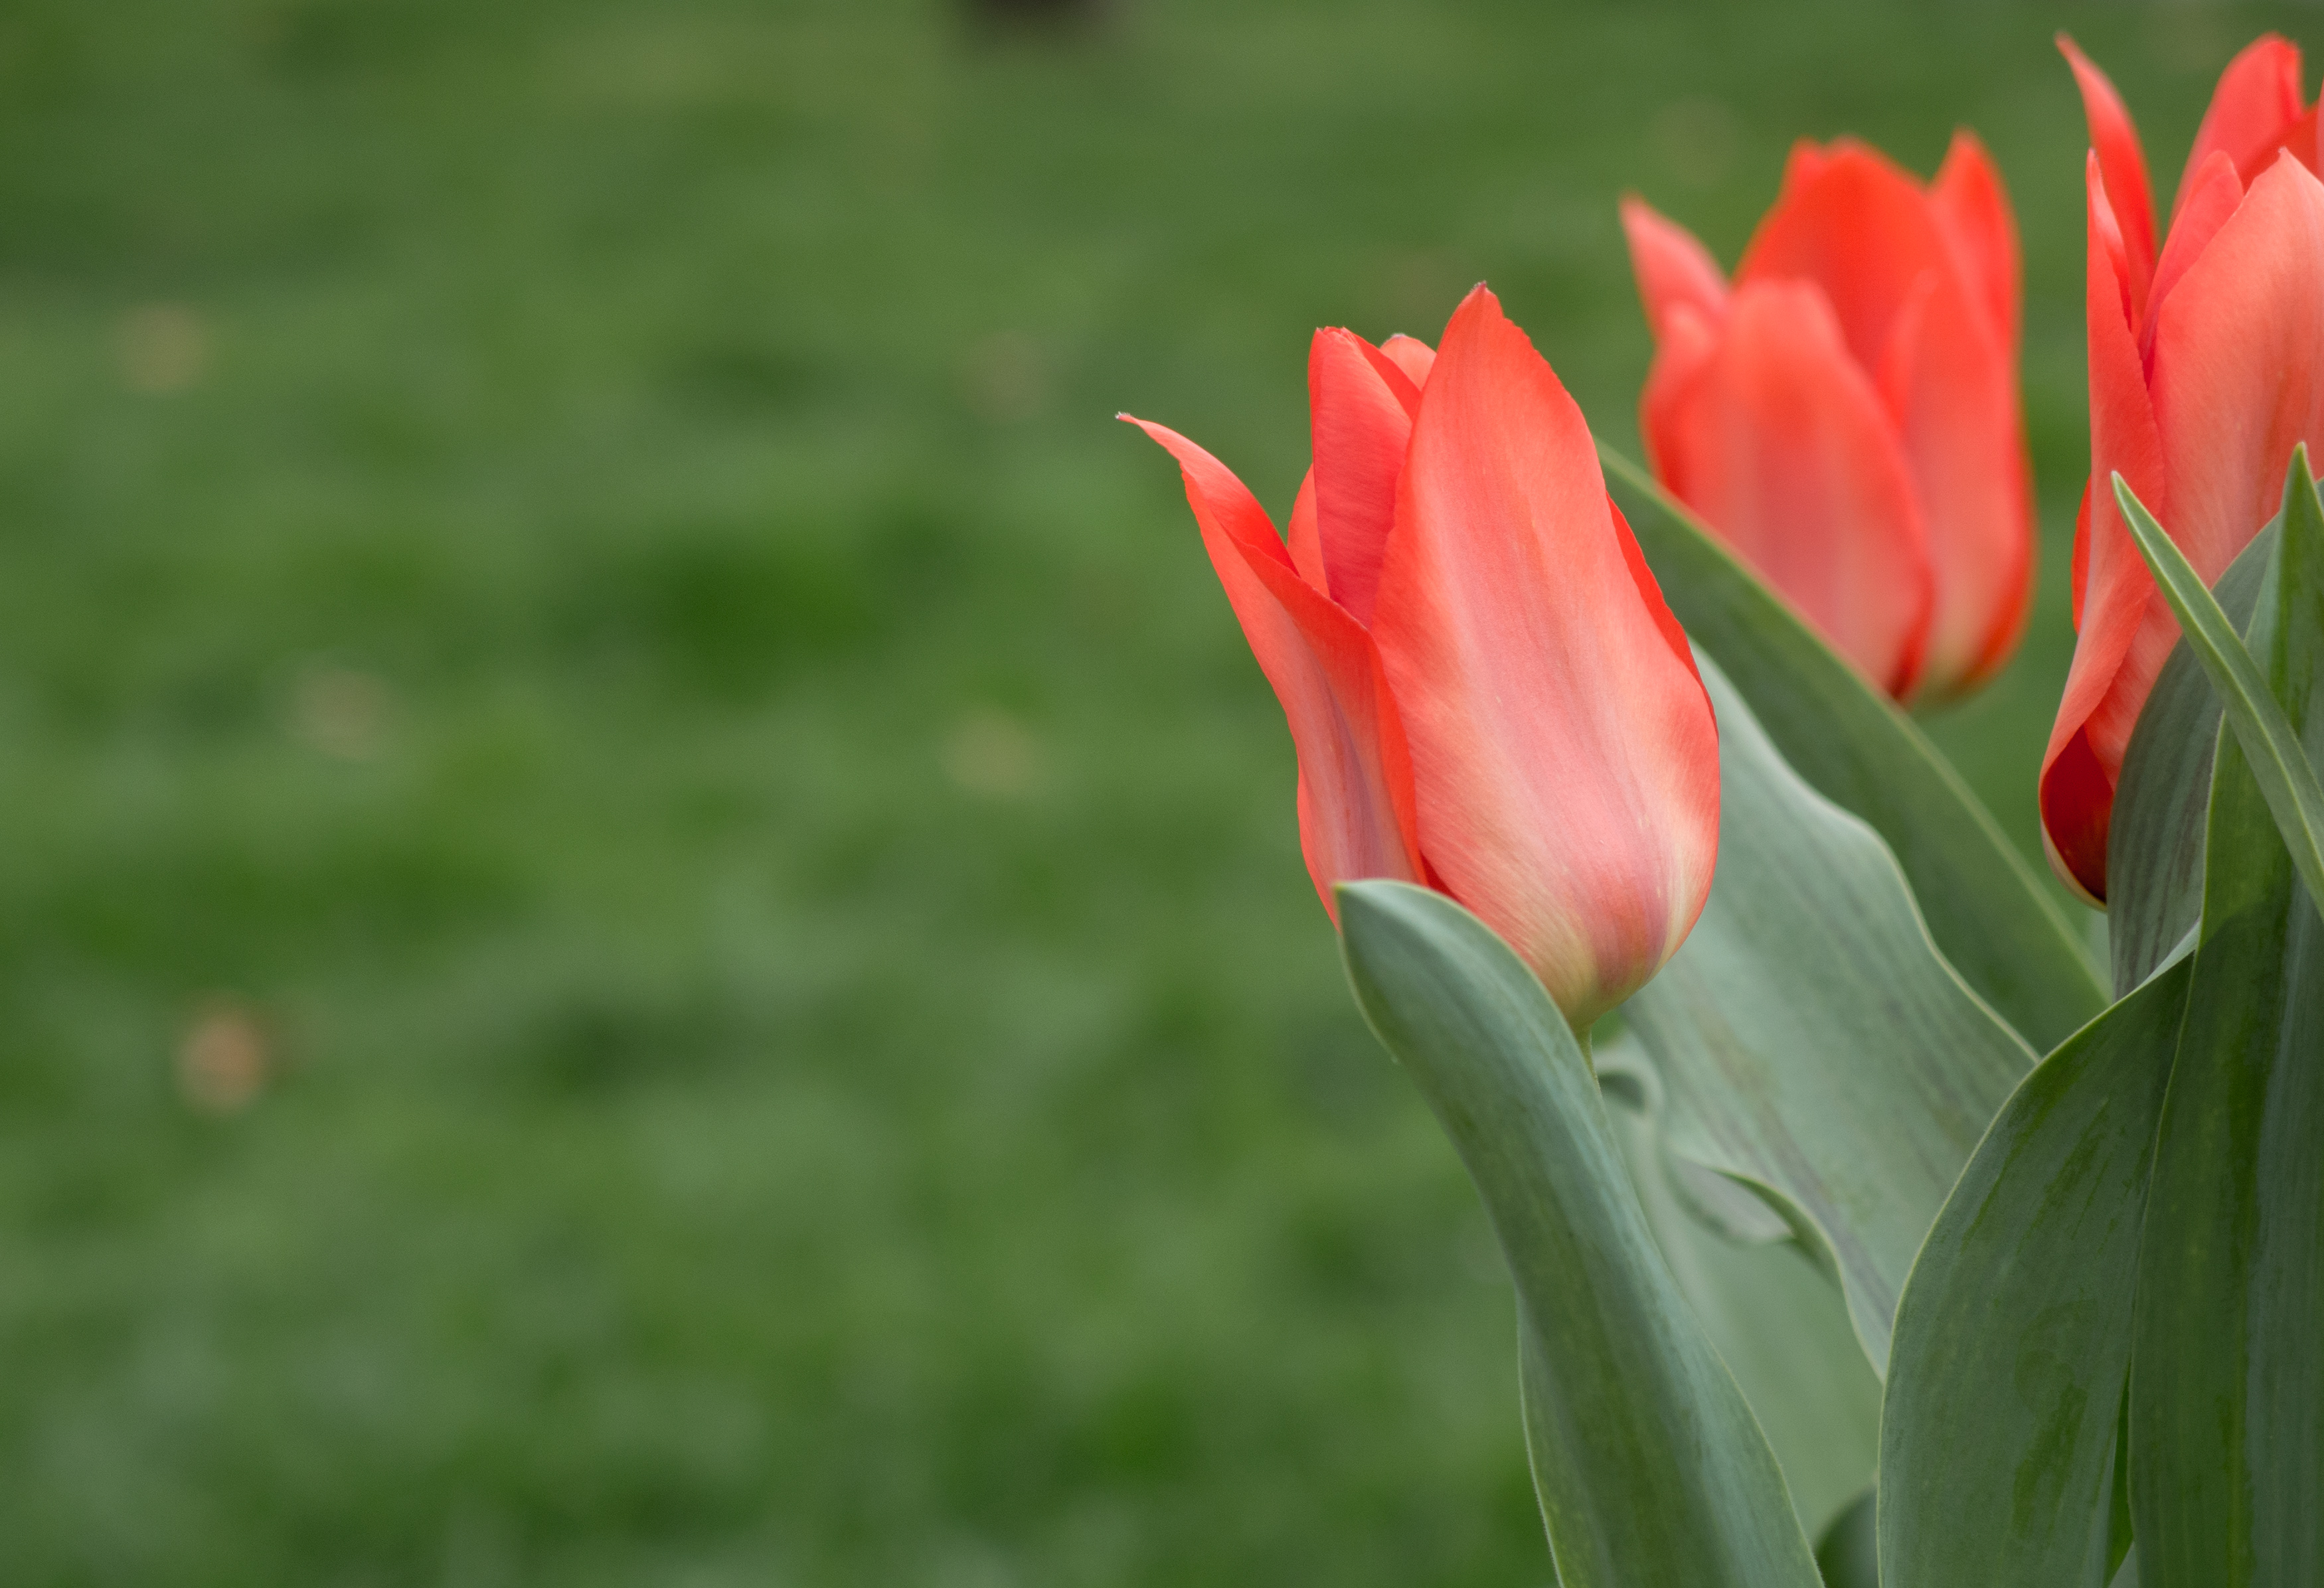 Free Image: Red Tulips On Green Background | Libreshot Public Domain ...